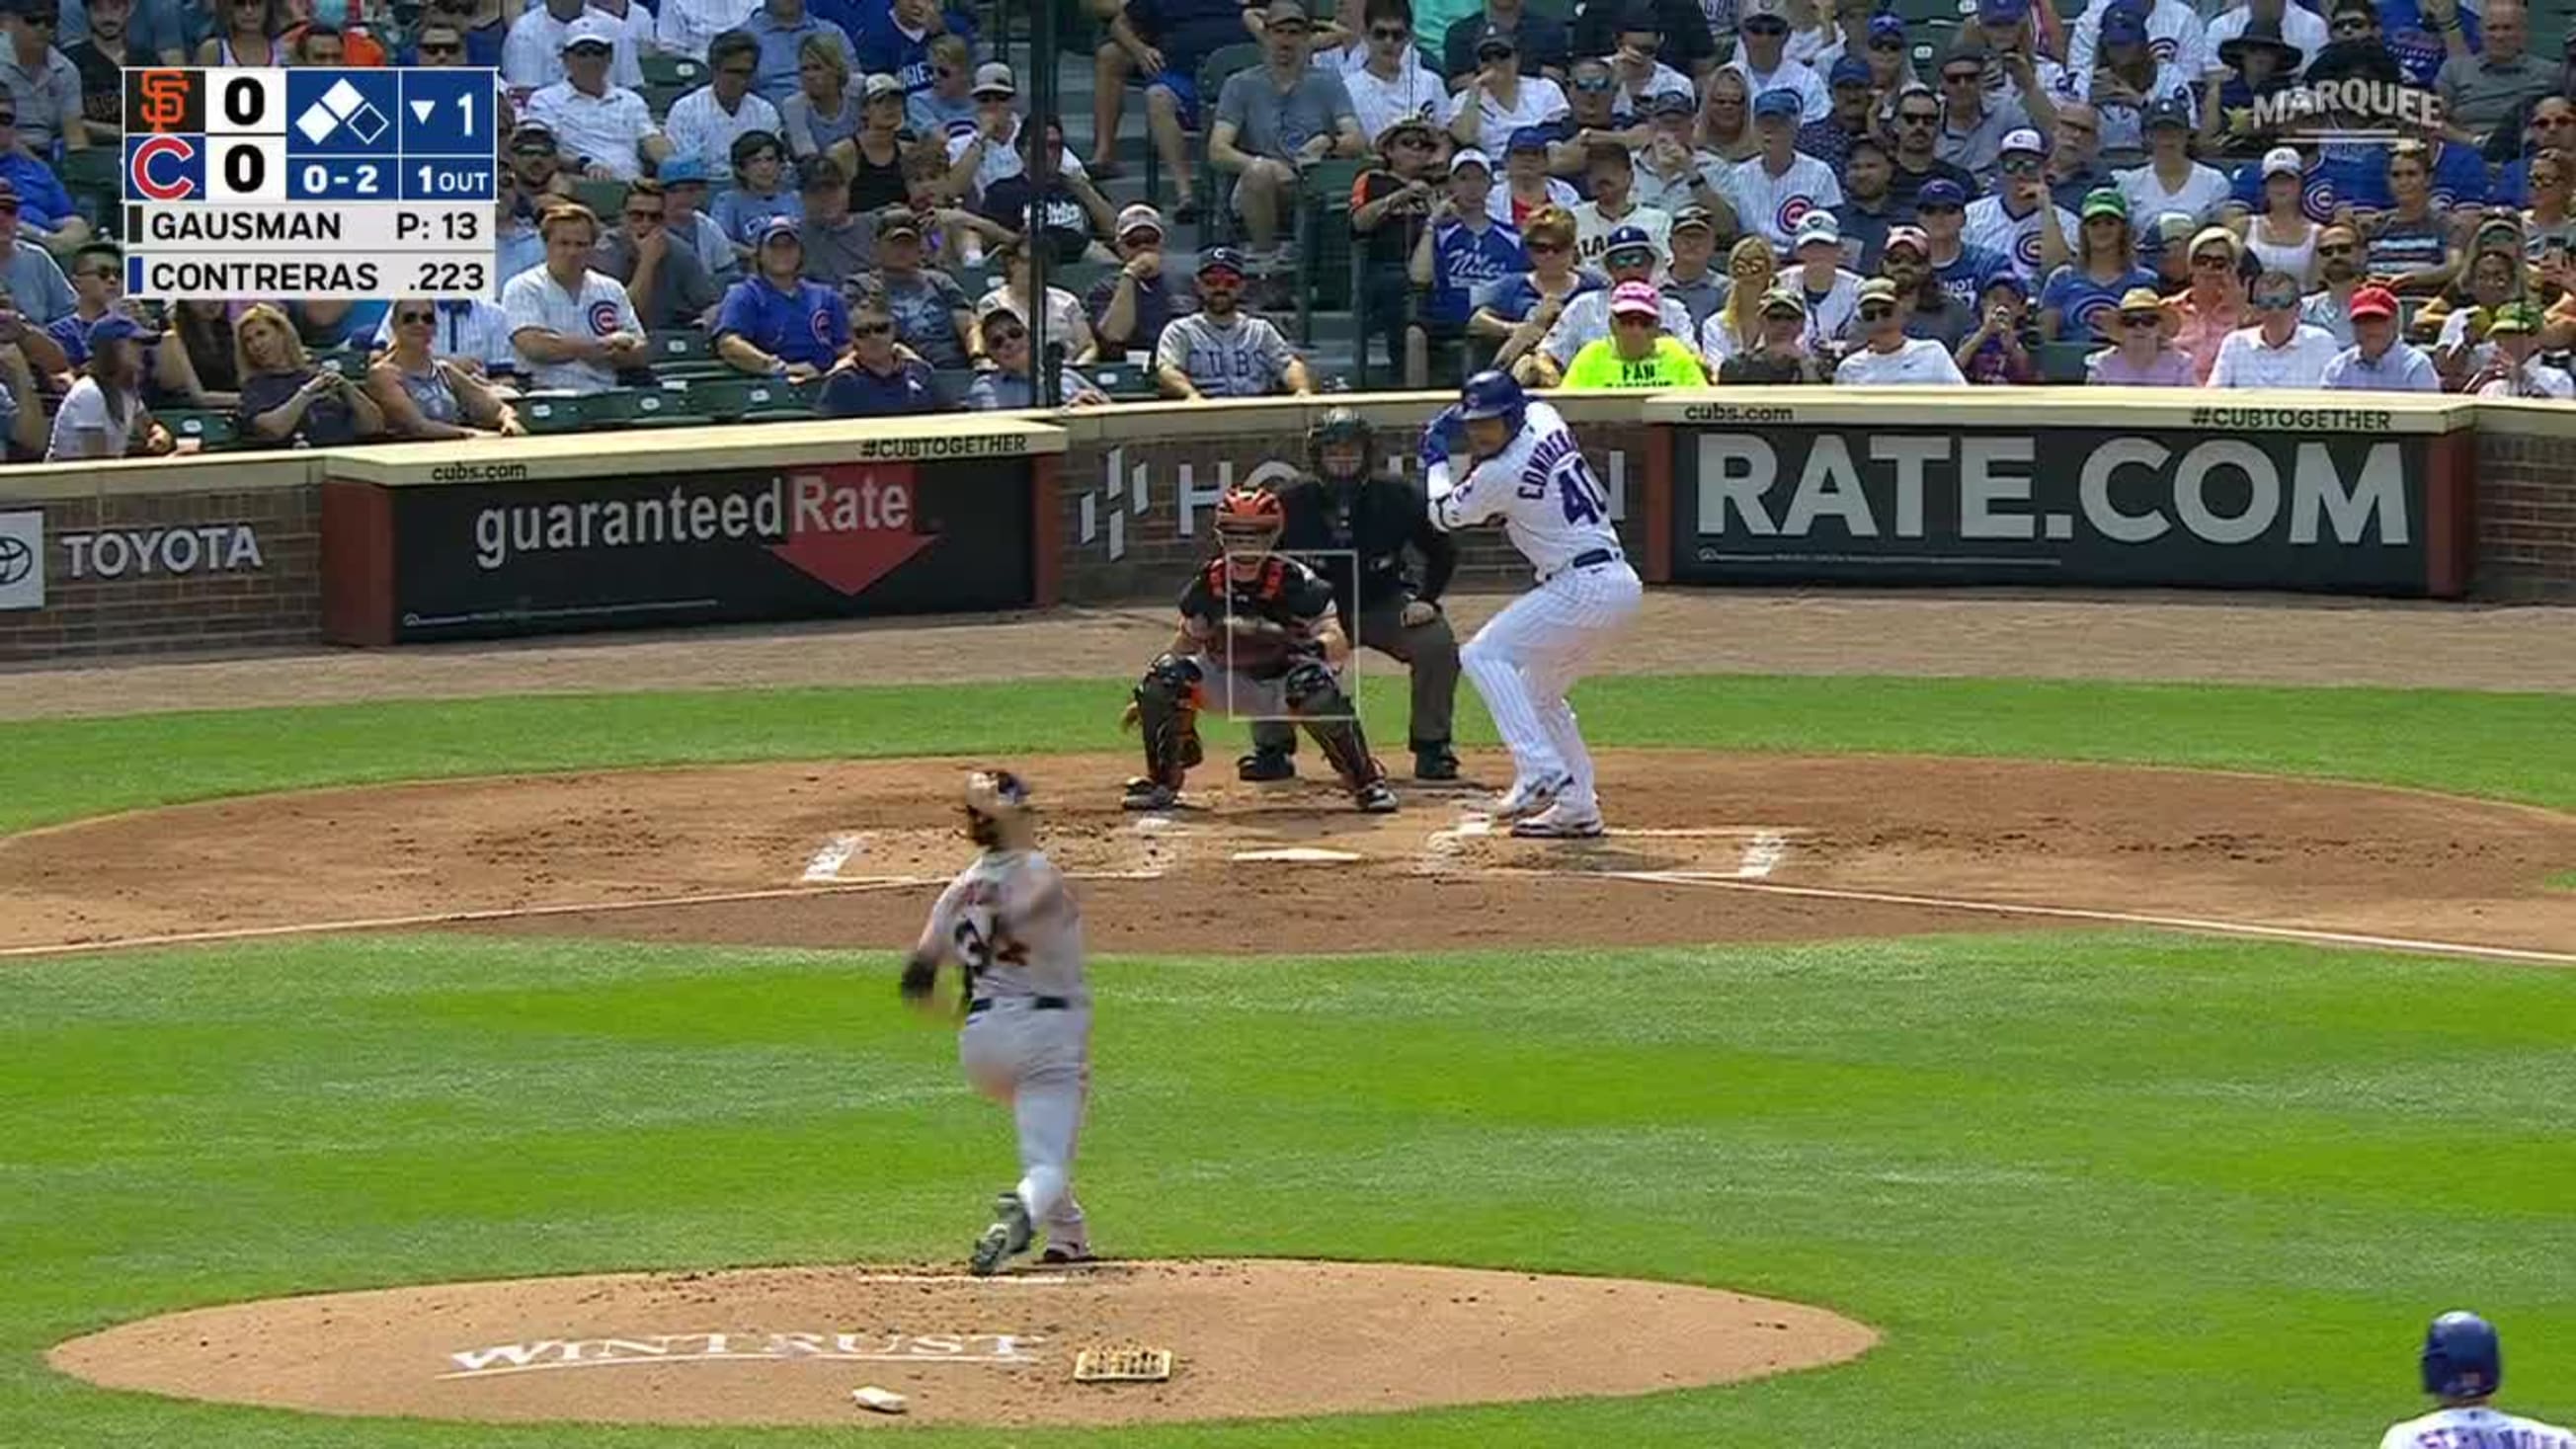 This angle of Willson Contreras getting hit by a pitch is wild 😮 (via